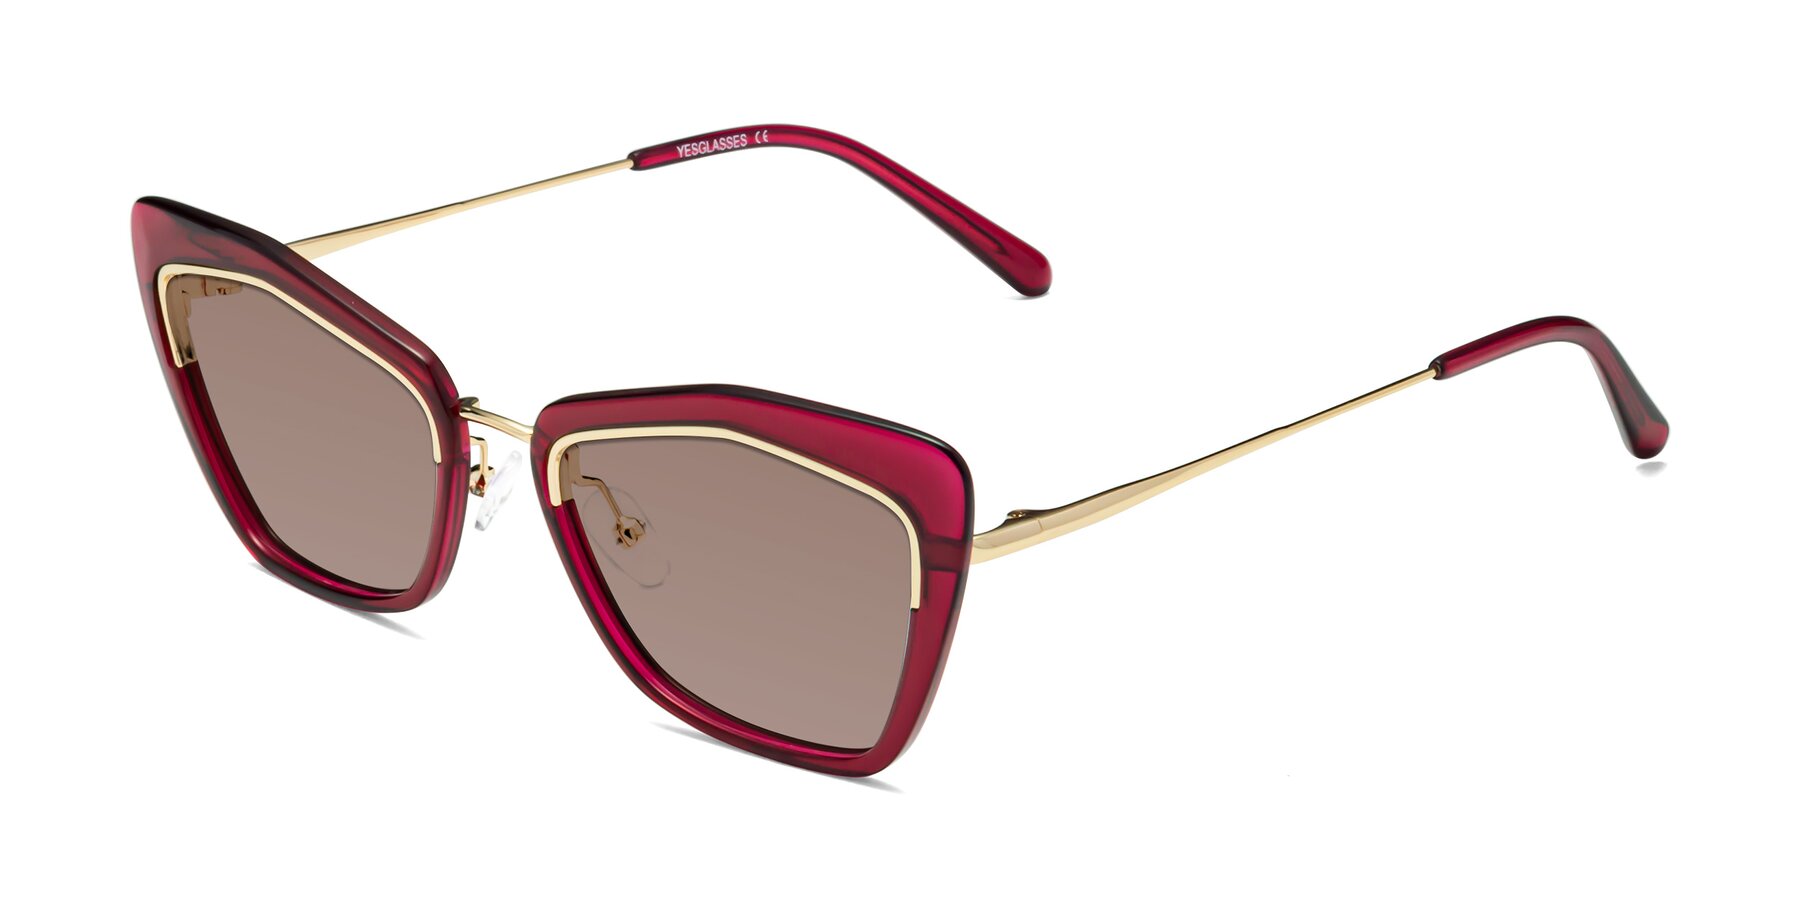 Angle of Lasso in Wine with Medium Brown Tinted Lenses